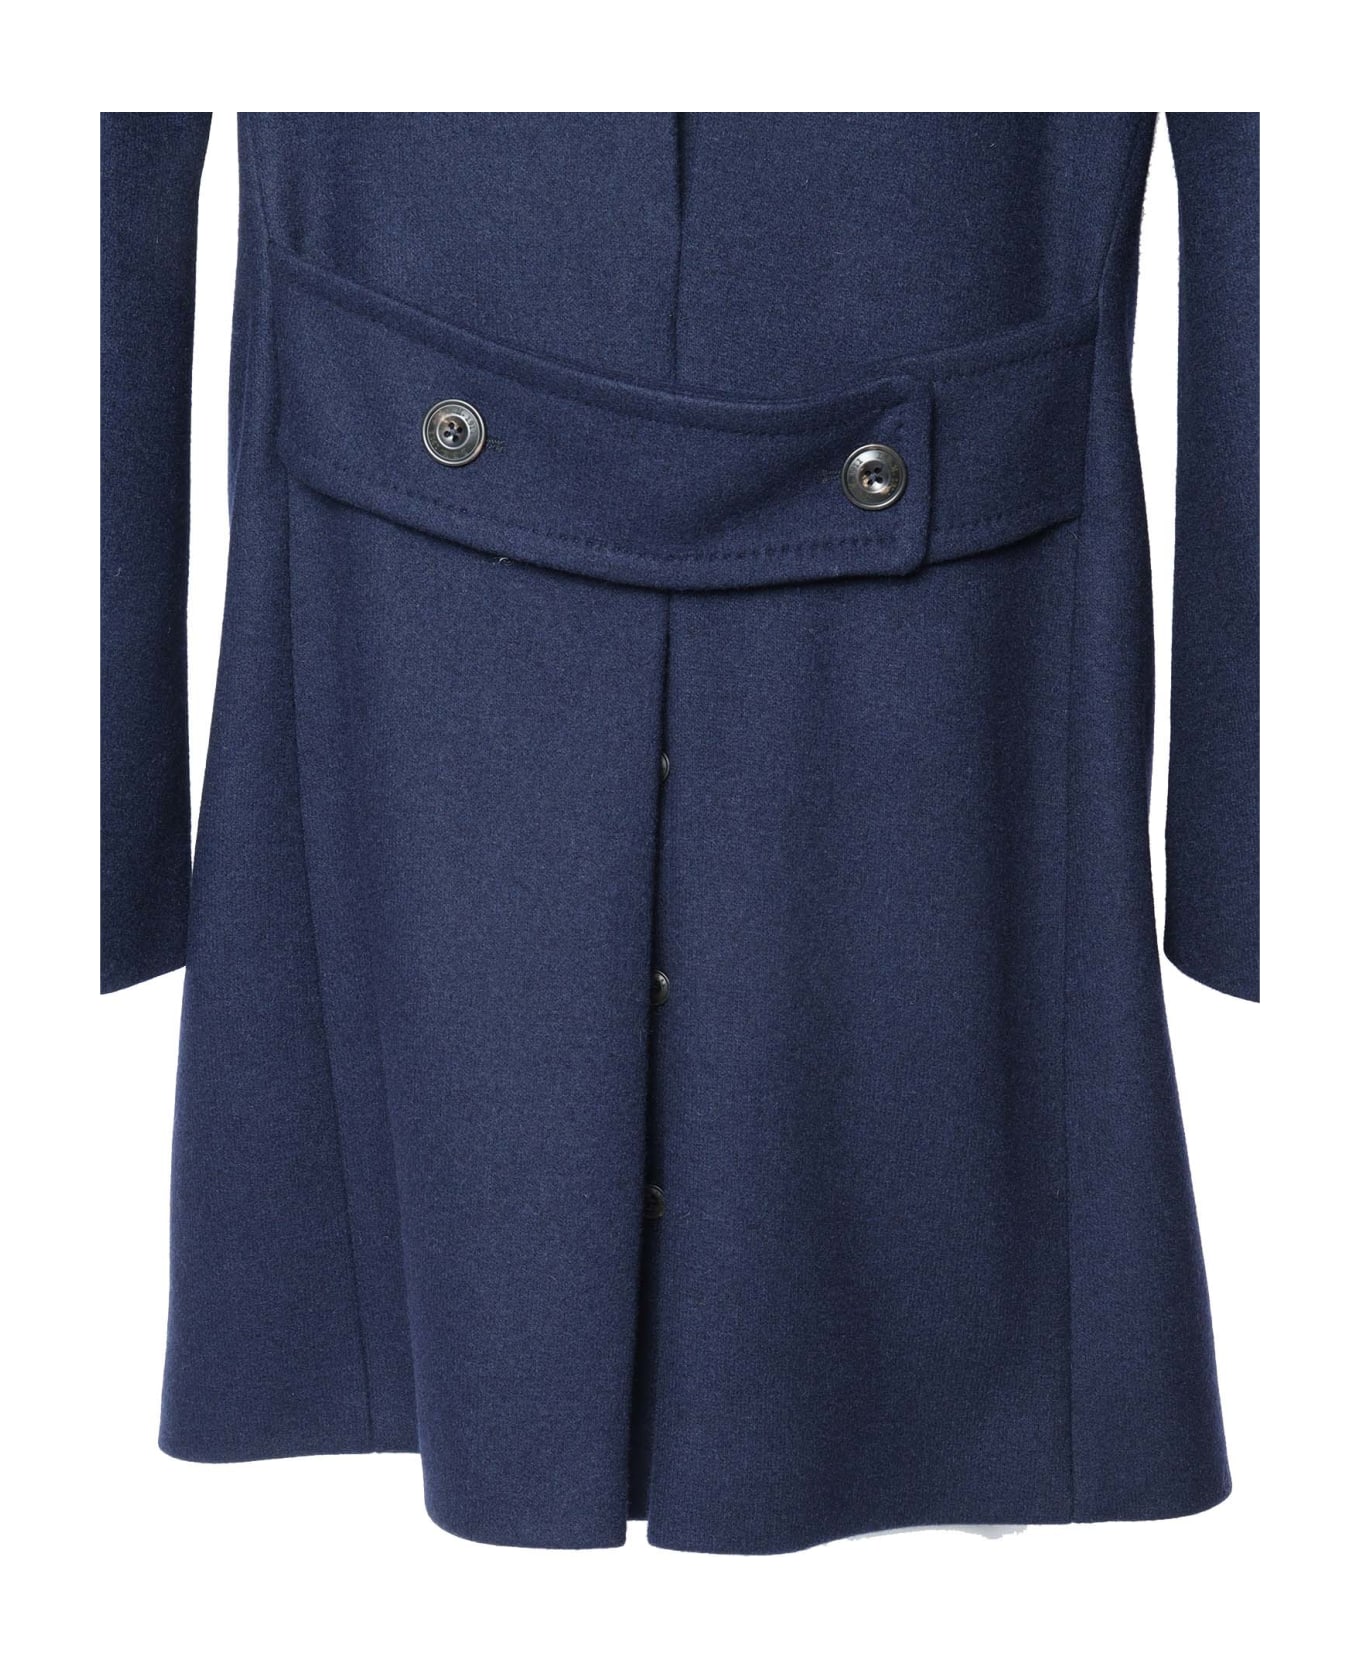 L.B.M. 1911 Double-breasted Coats - BLUE